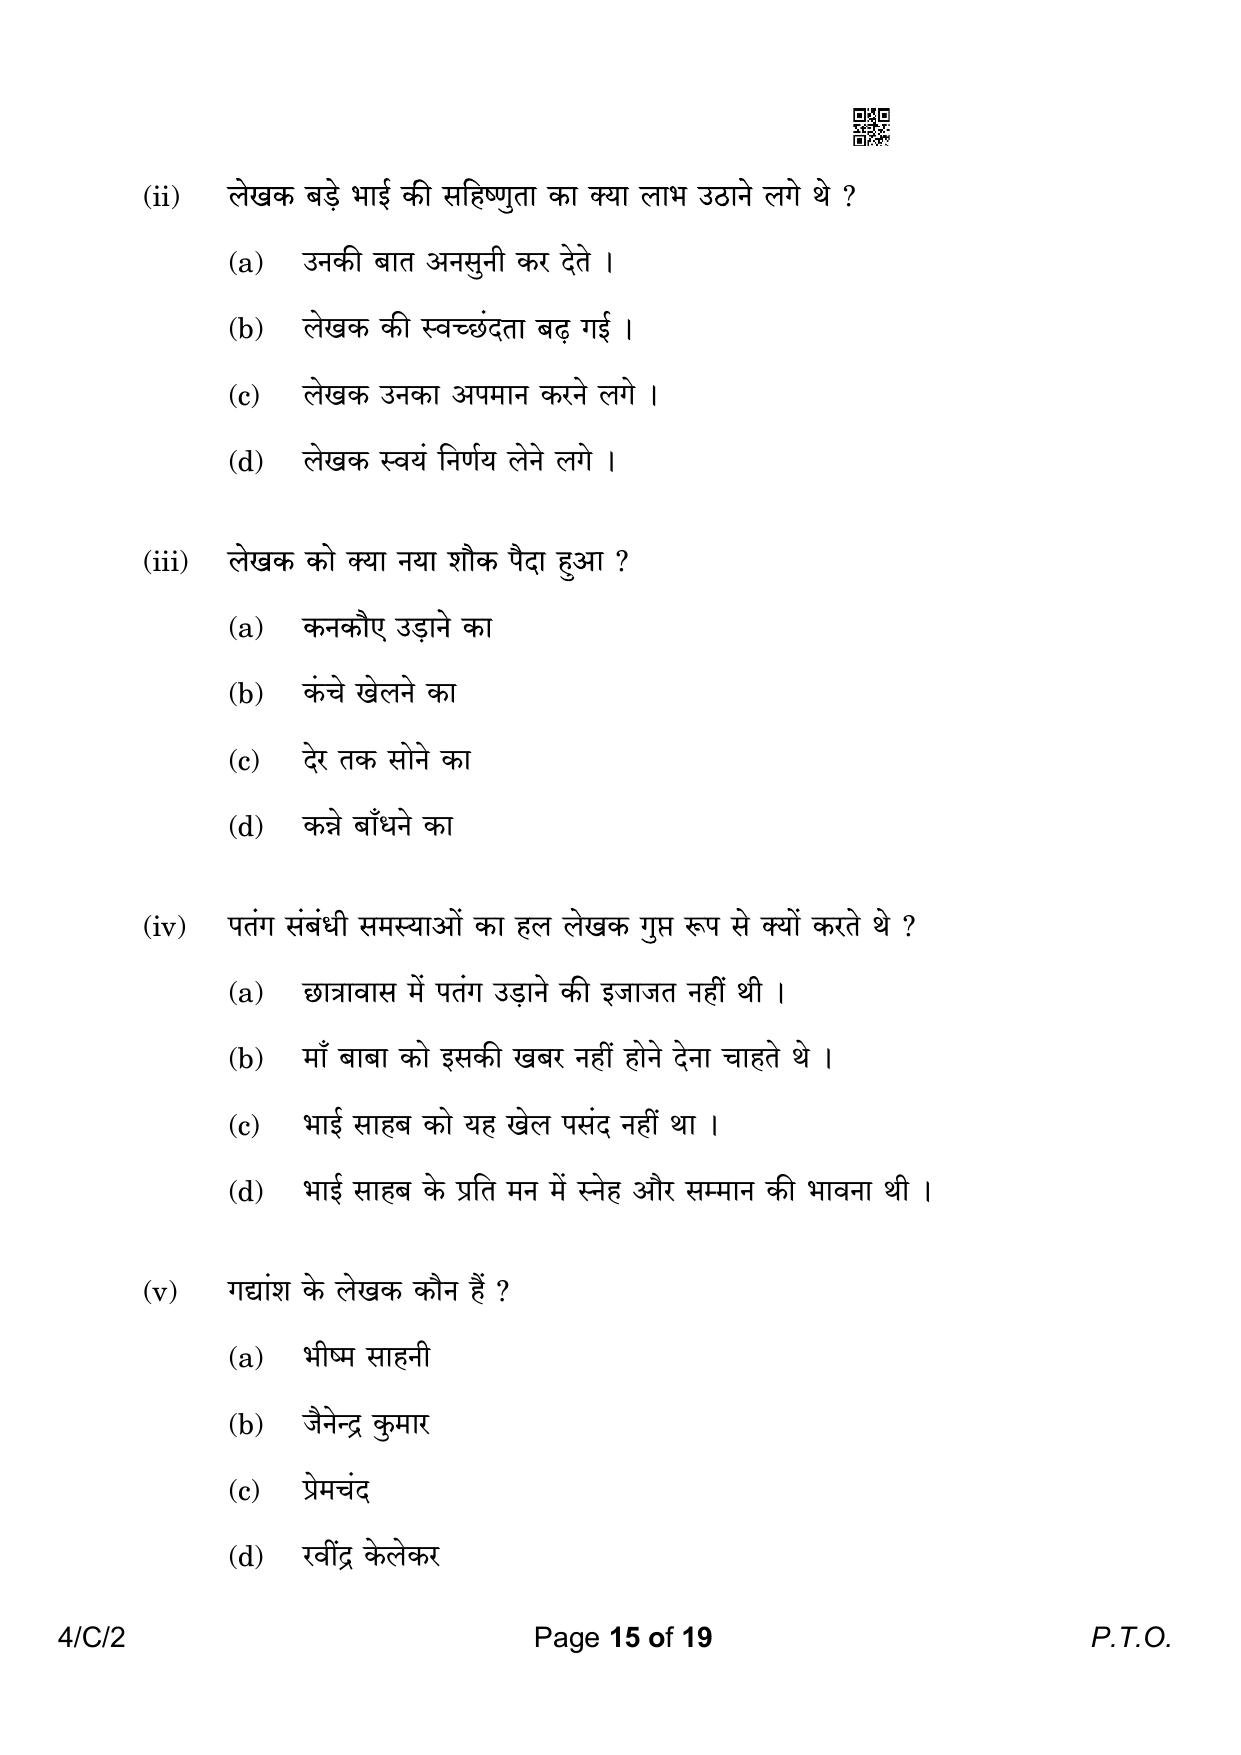 CBSE Class 10 4-2 Hindi B 2023 (Compartment) Question Paper - Page 15